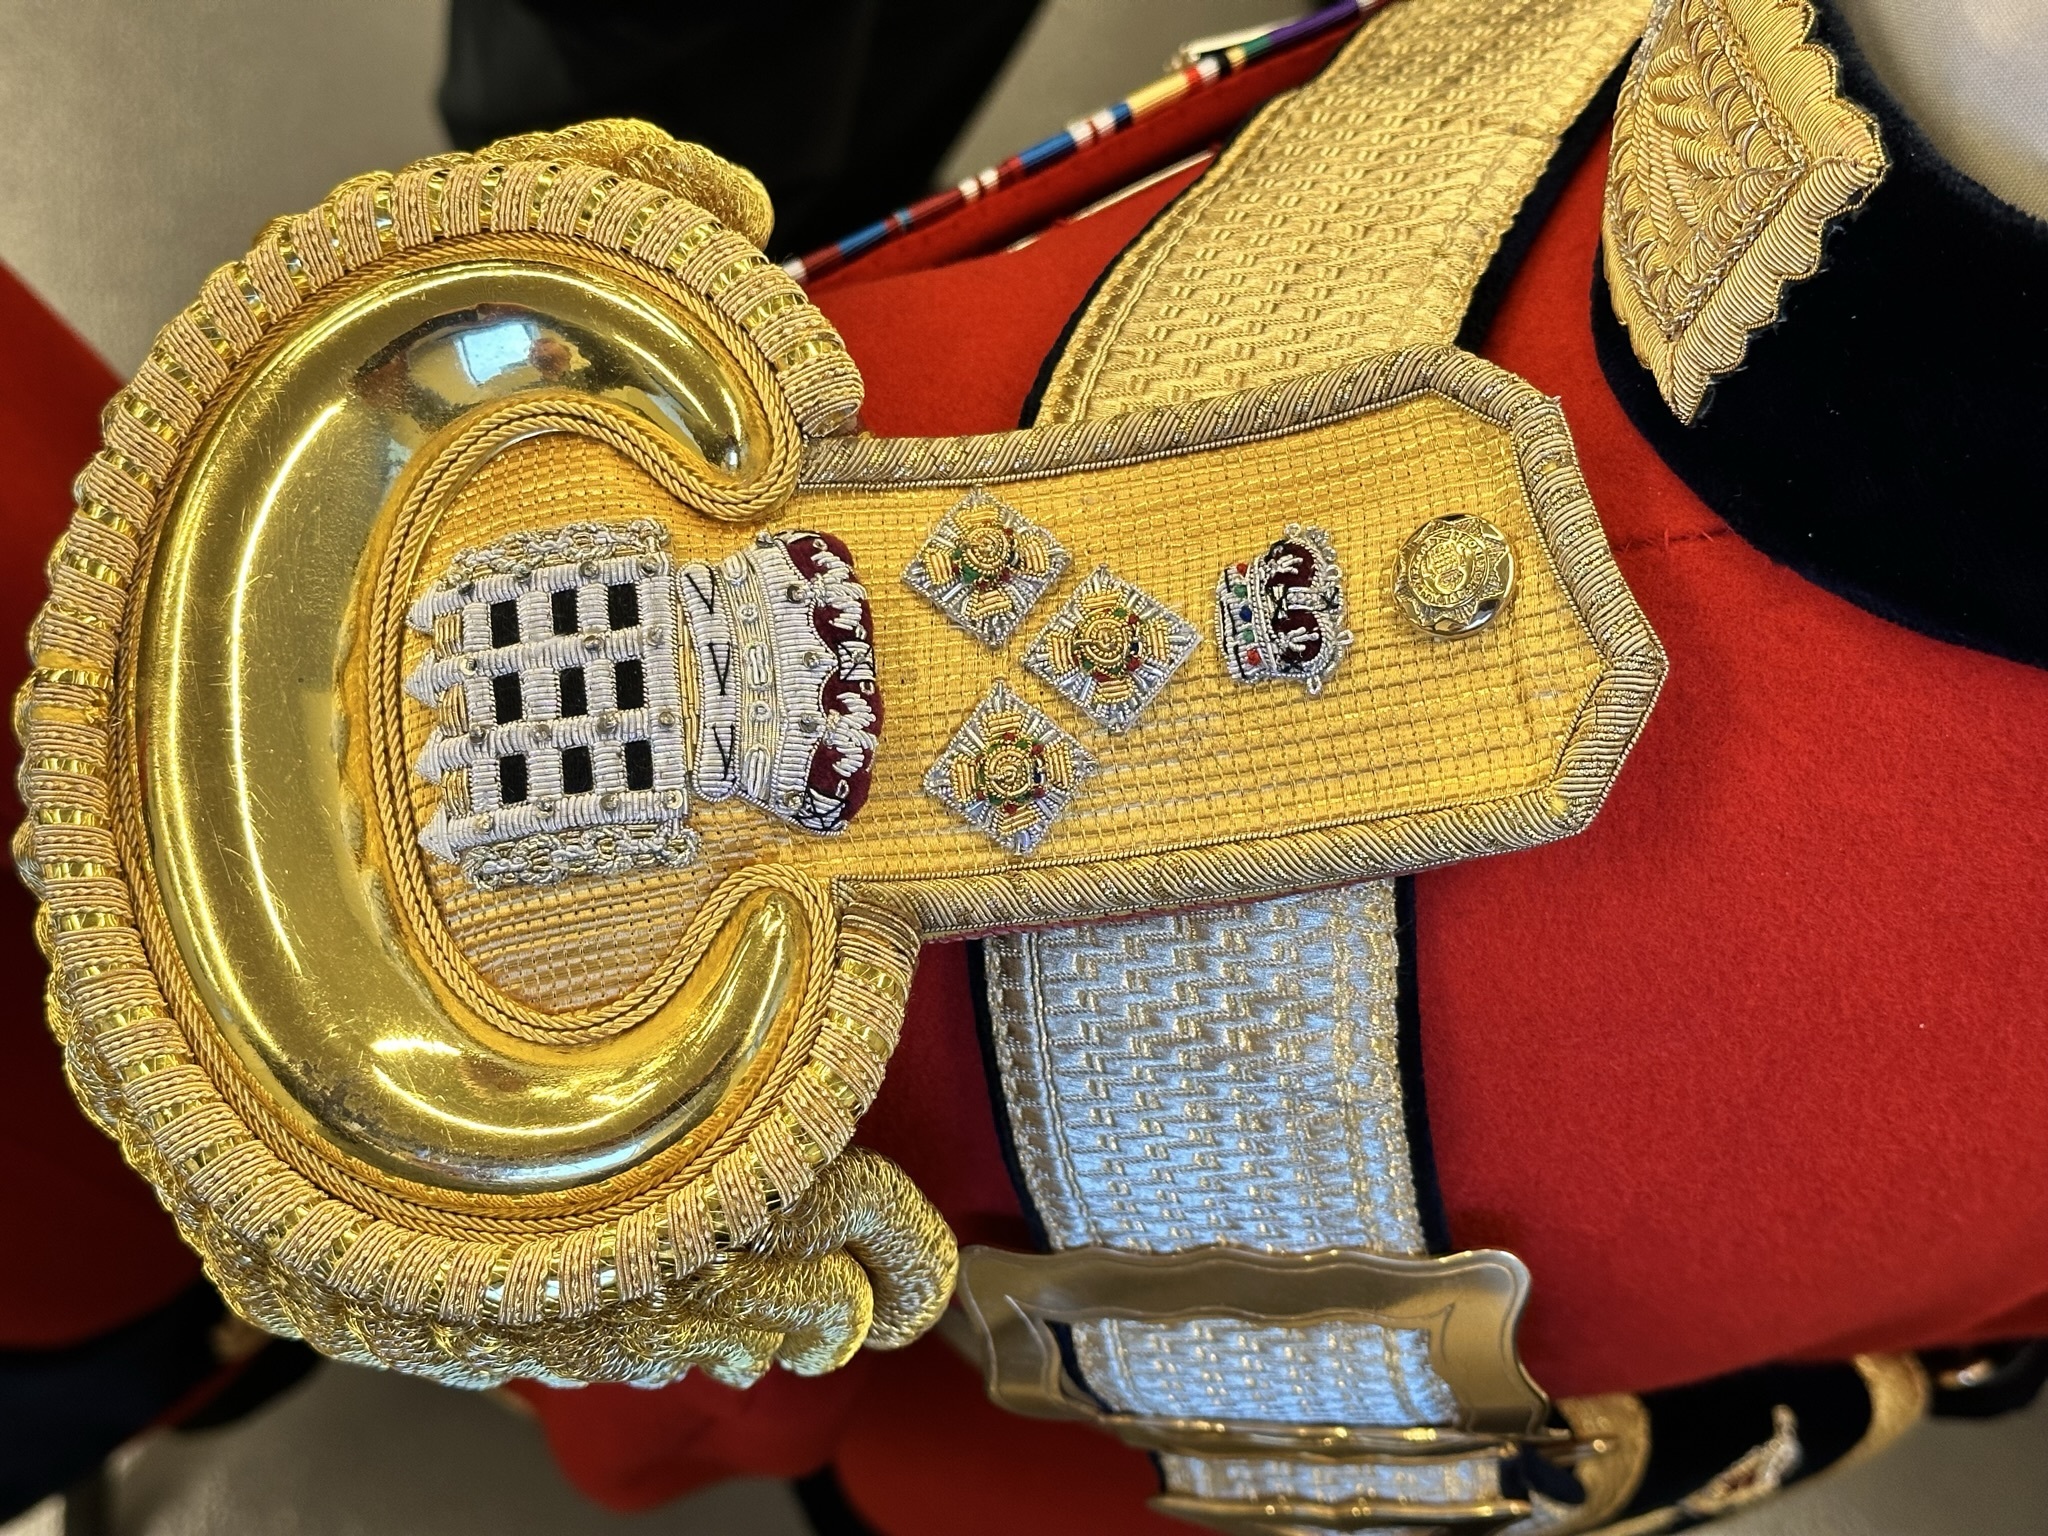 Embroidered epaulettes. Gentlemen at Arms ceremonial uniform, the ceremonial bodyguard of King Charles III, which was founded by King Henry VIII in 1509. 13-May-2023.